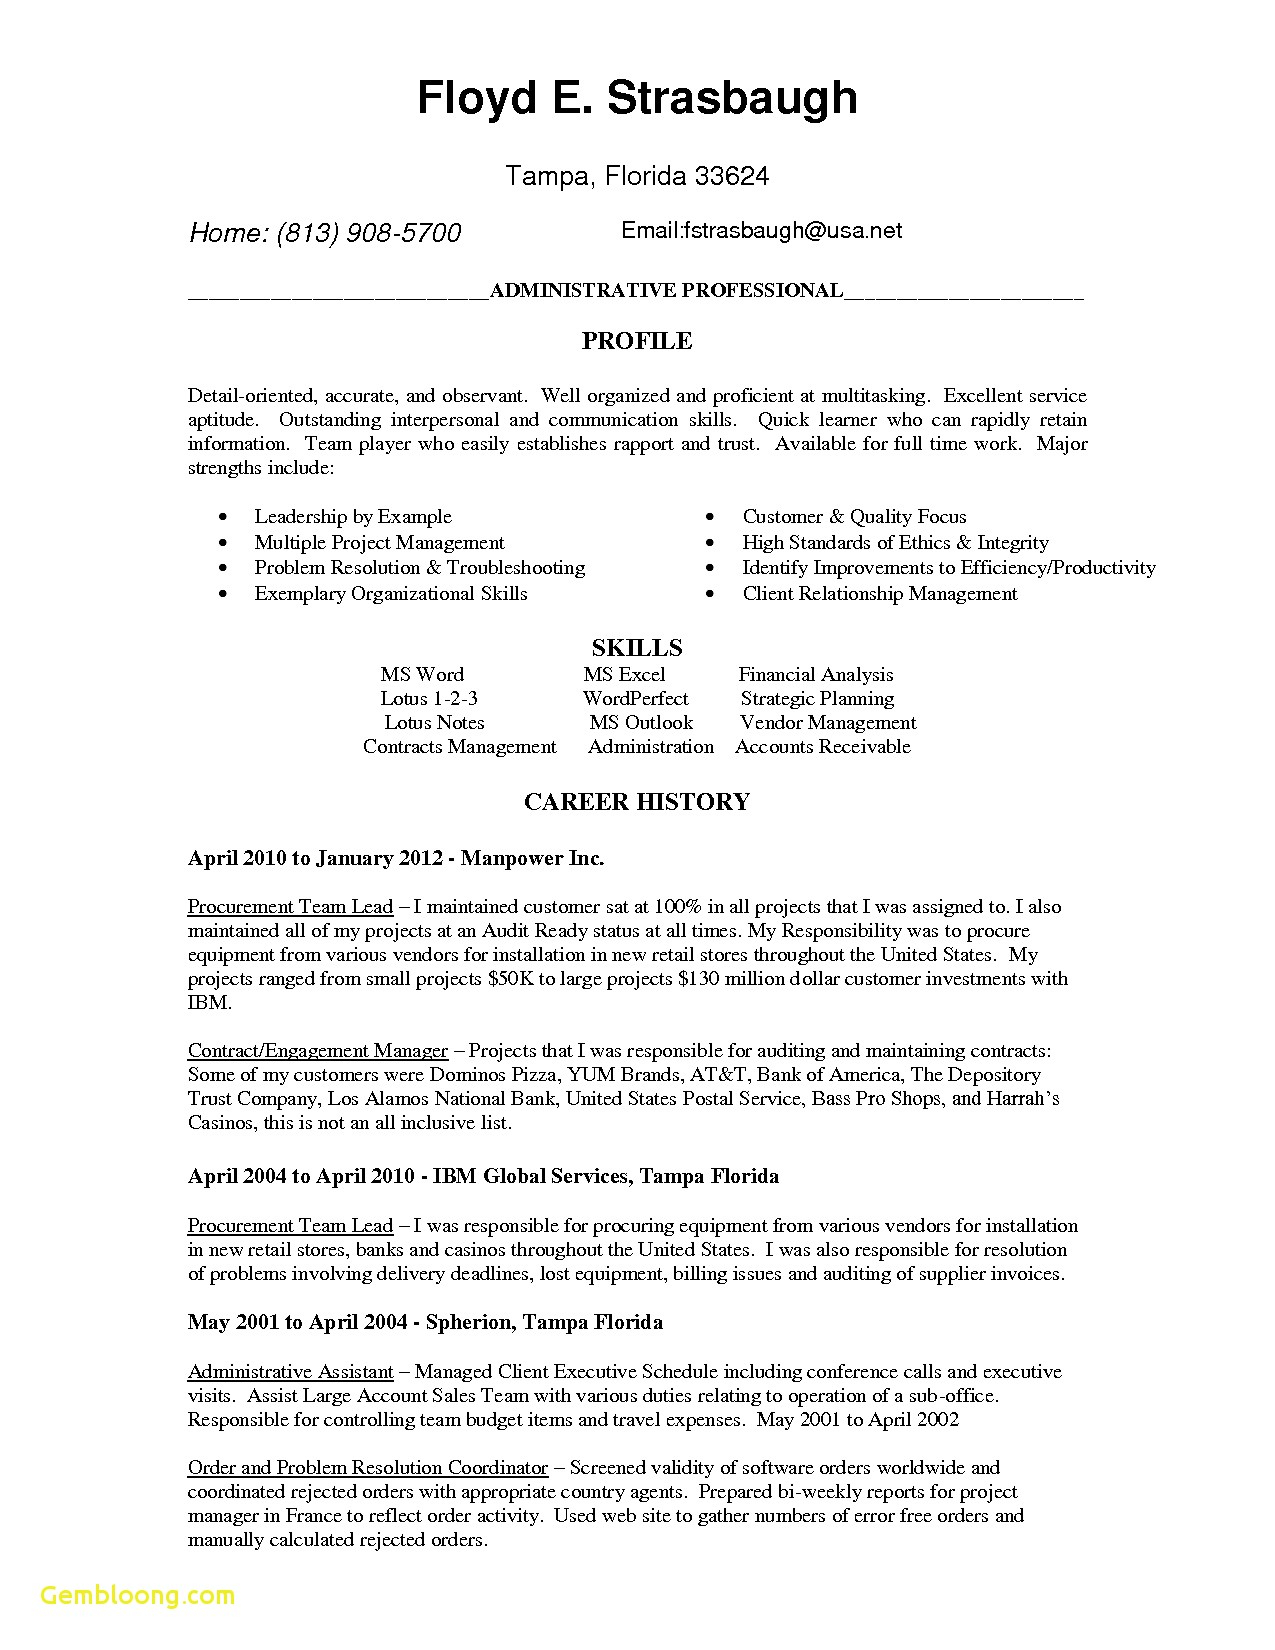 Letter Of Support Template - Technical Support Specialist Resume Professional Job Resume Template